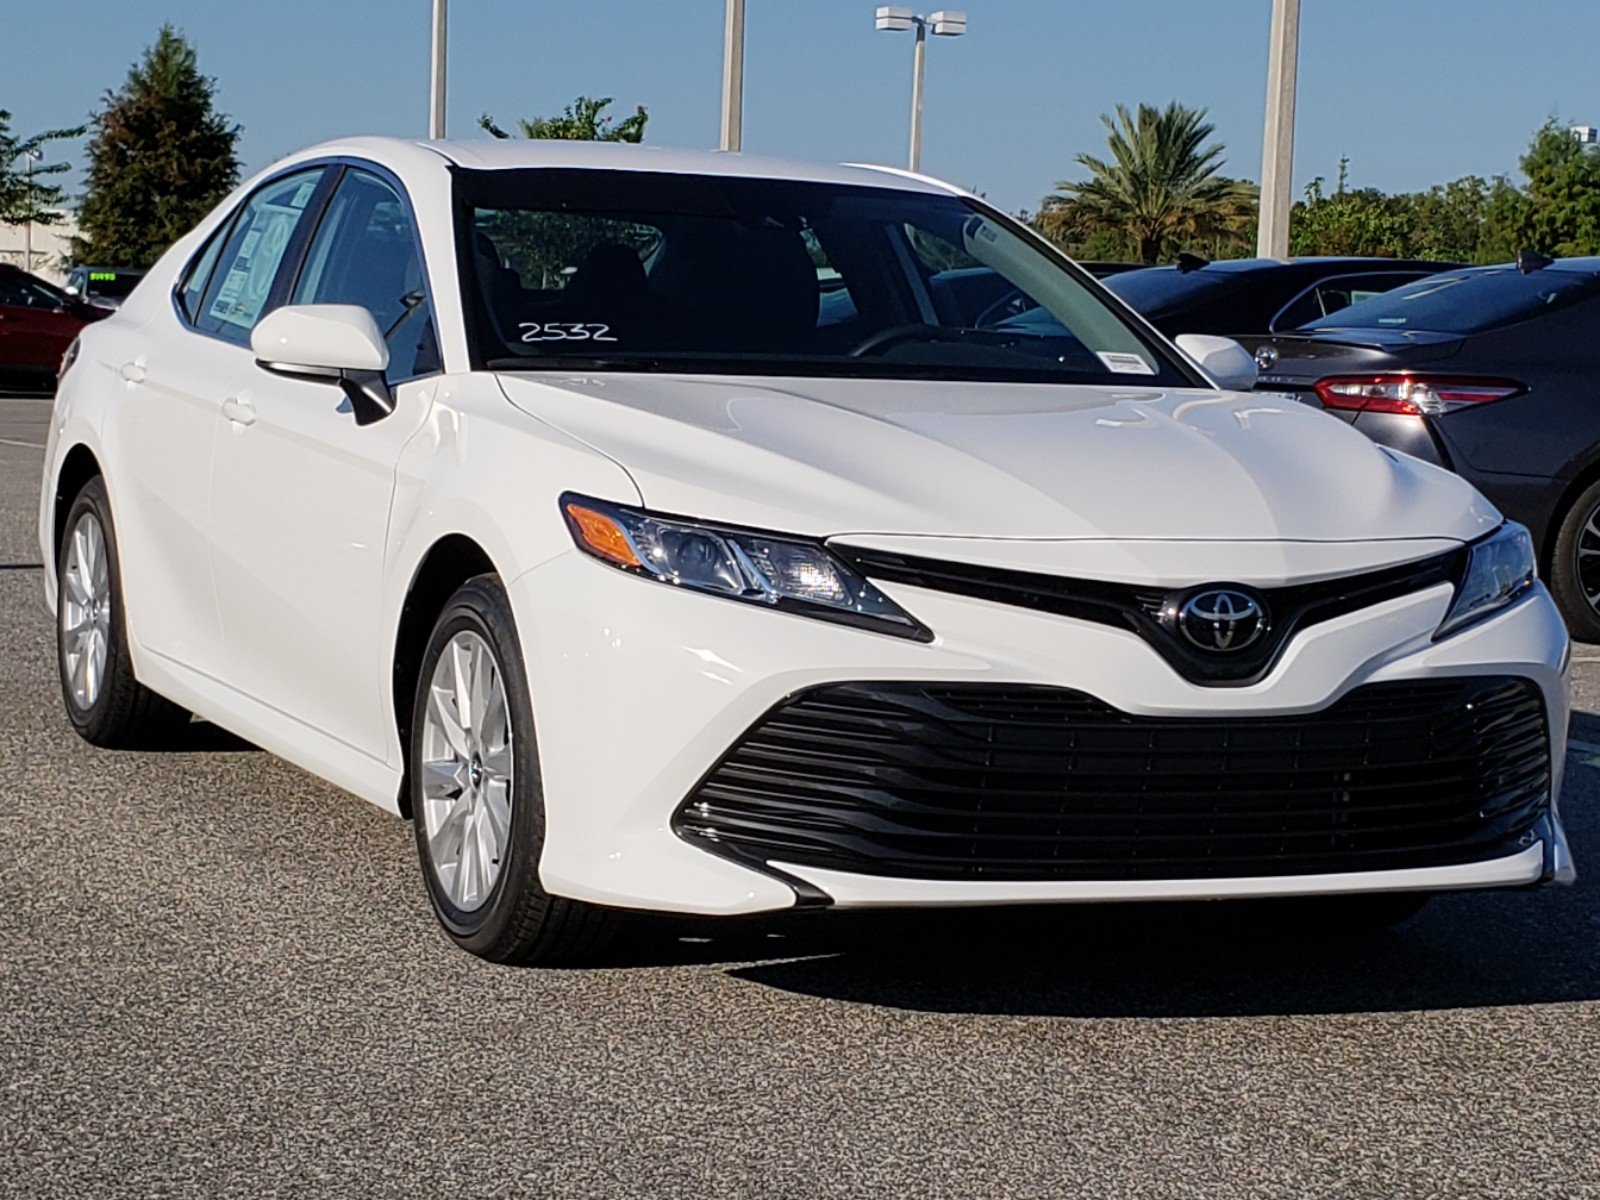 New 2019 Toyota Camry LE 4dr Car in Orlando #9250058 | Toyota of Orlando